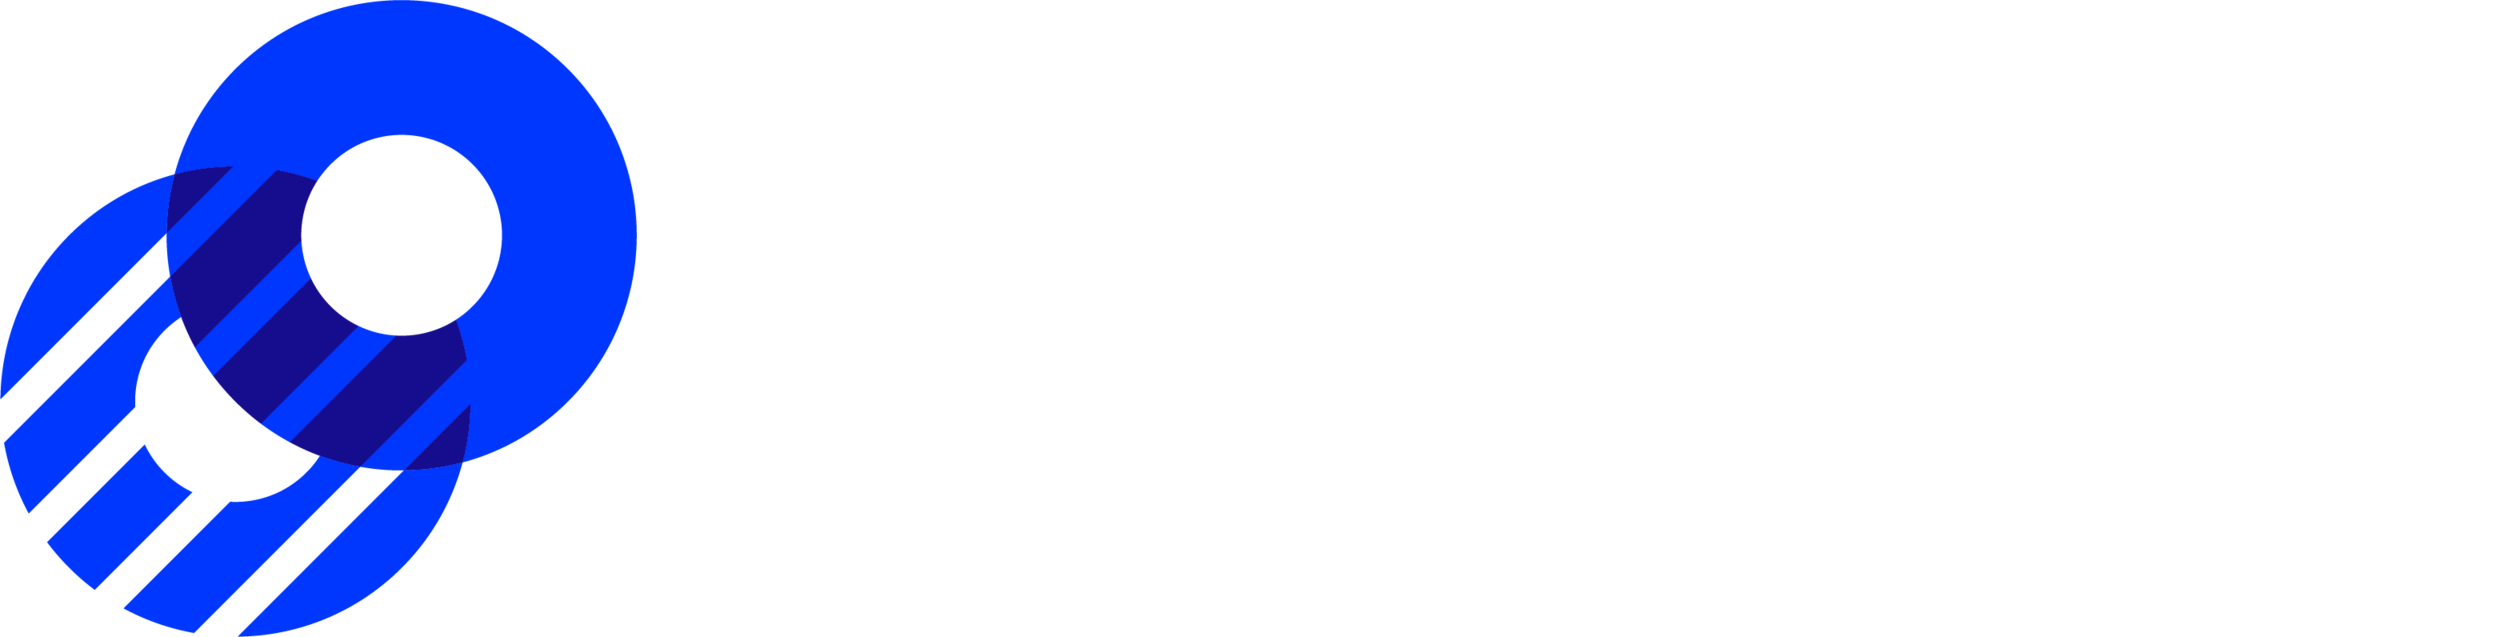 Optimizely_Logo_Primary_Full_Color_Light.png